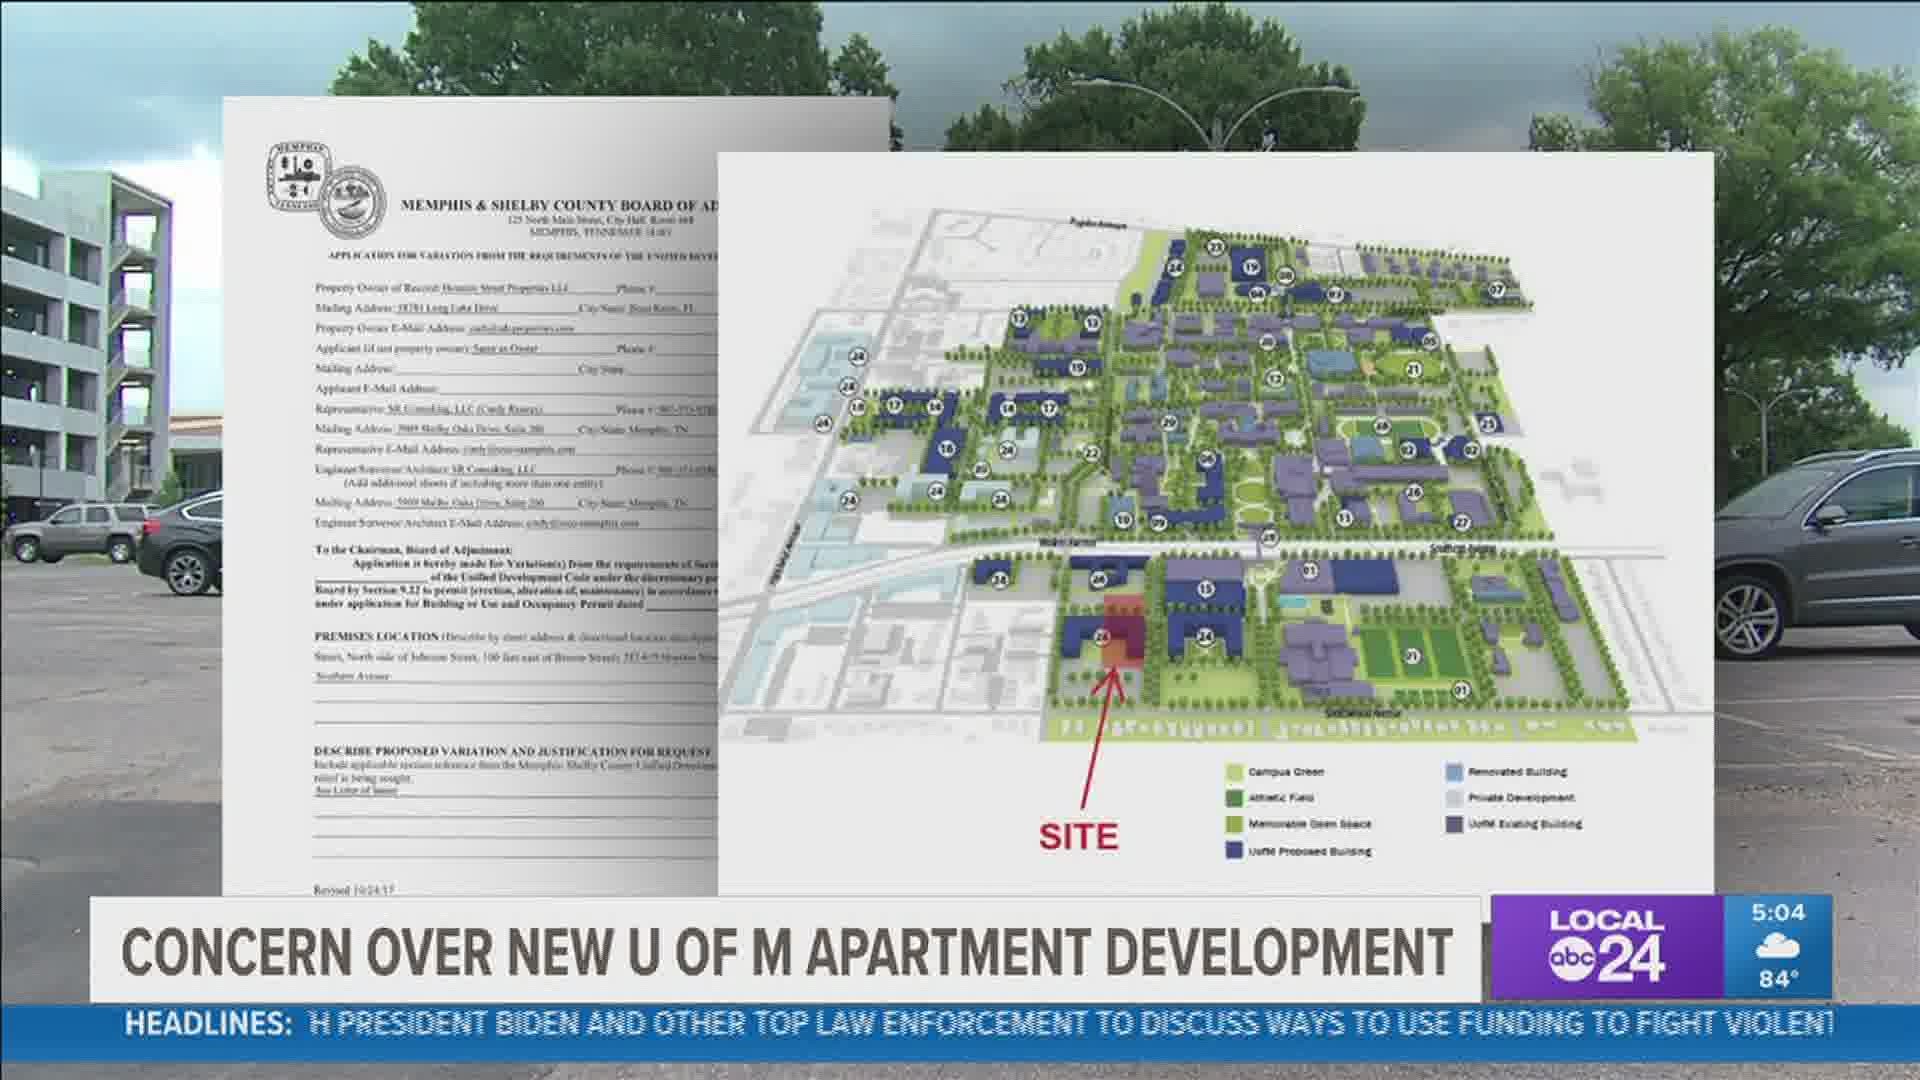 The project is almost 100 apartment units across from campus.